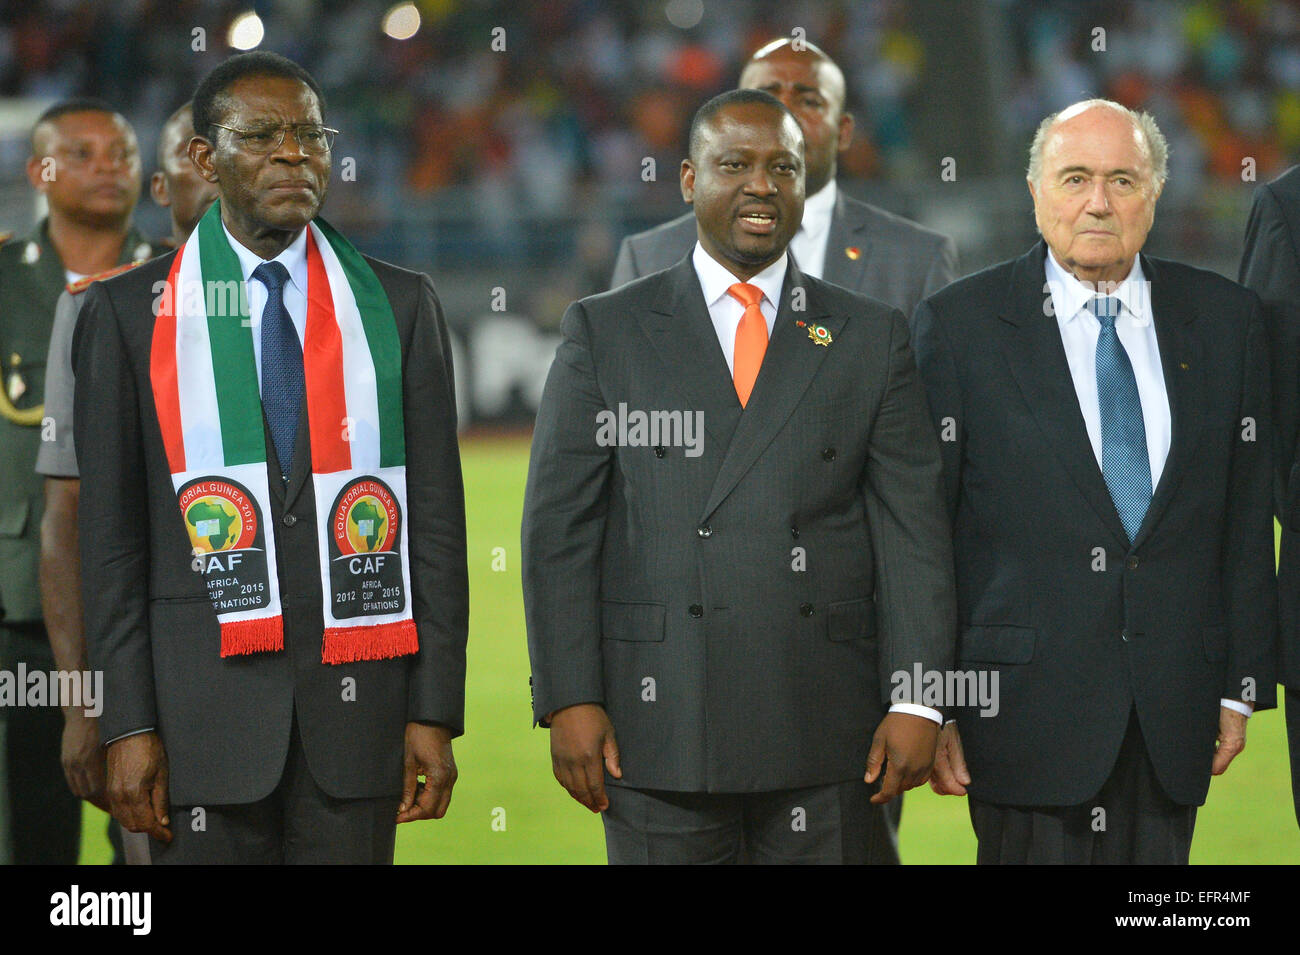 Bata, Equatorial Guinea. 08th Feb, 2015. Africa Cup of Nations Final. Teodoro Obiang Nguema Mbasogo - President Equ Guinies with Joseph Sepp Blatter of FIFA The Ivory Coast team won the final against Ghana with a dramatic 9-8 penalty shootout victory. Credit:  Action Plus Sports/Alamy Live News Stock Photo